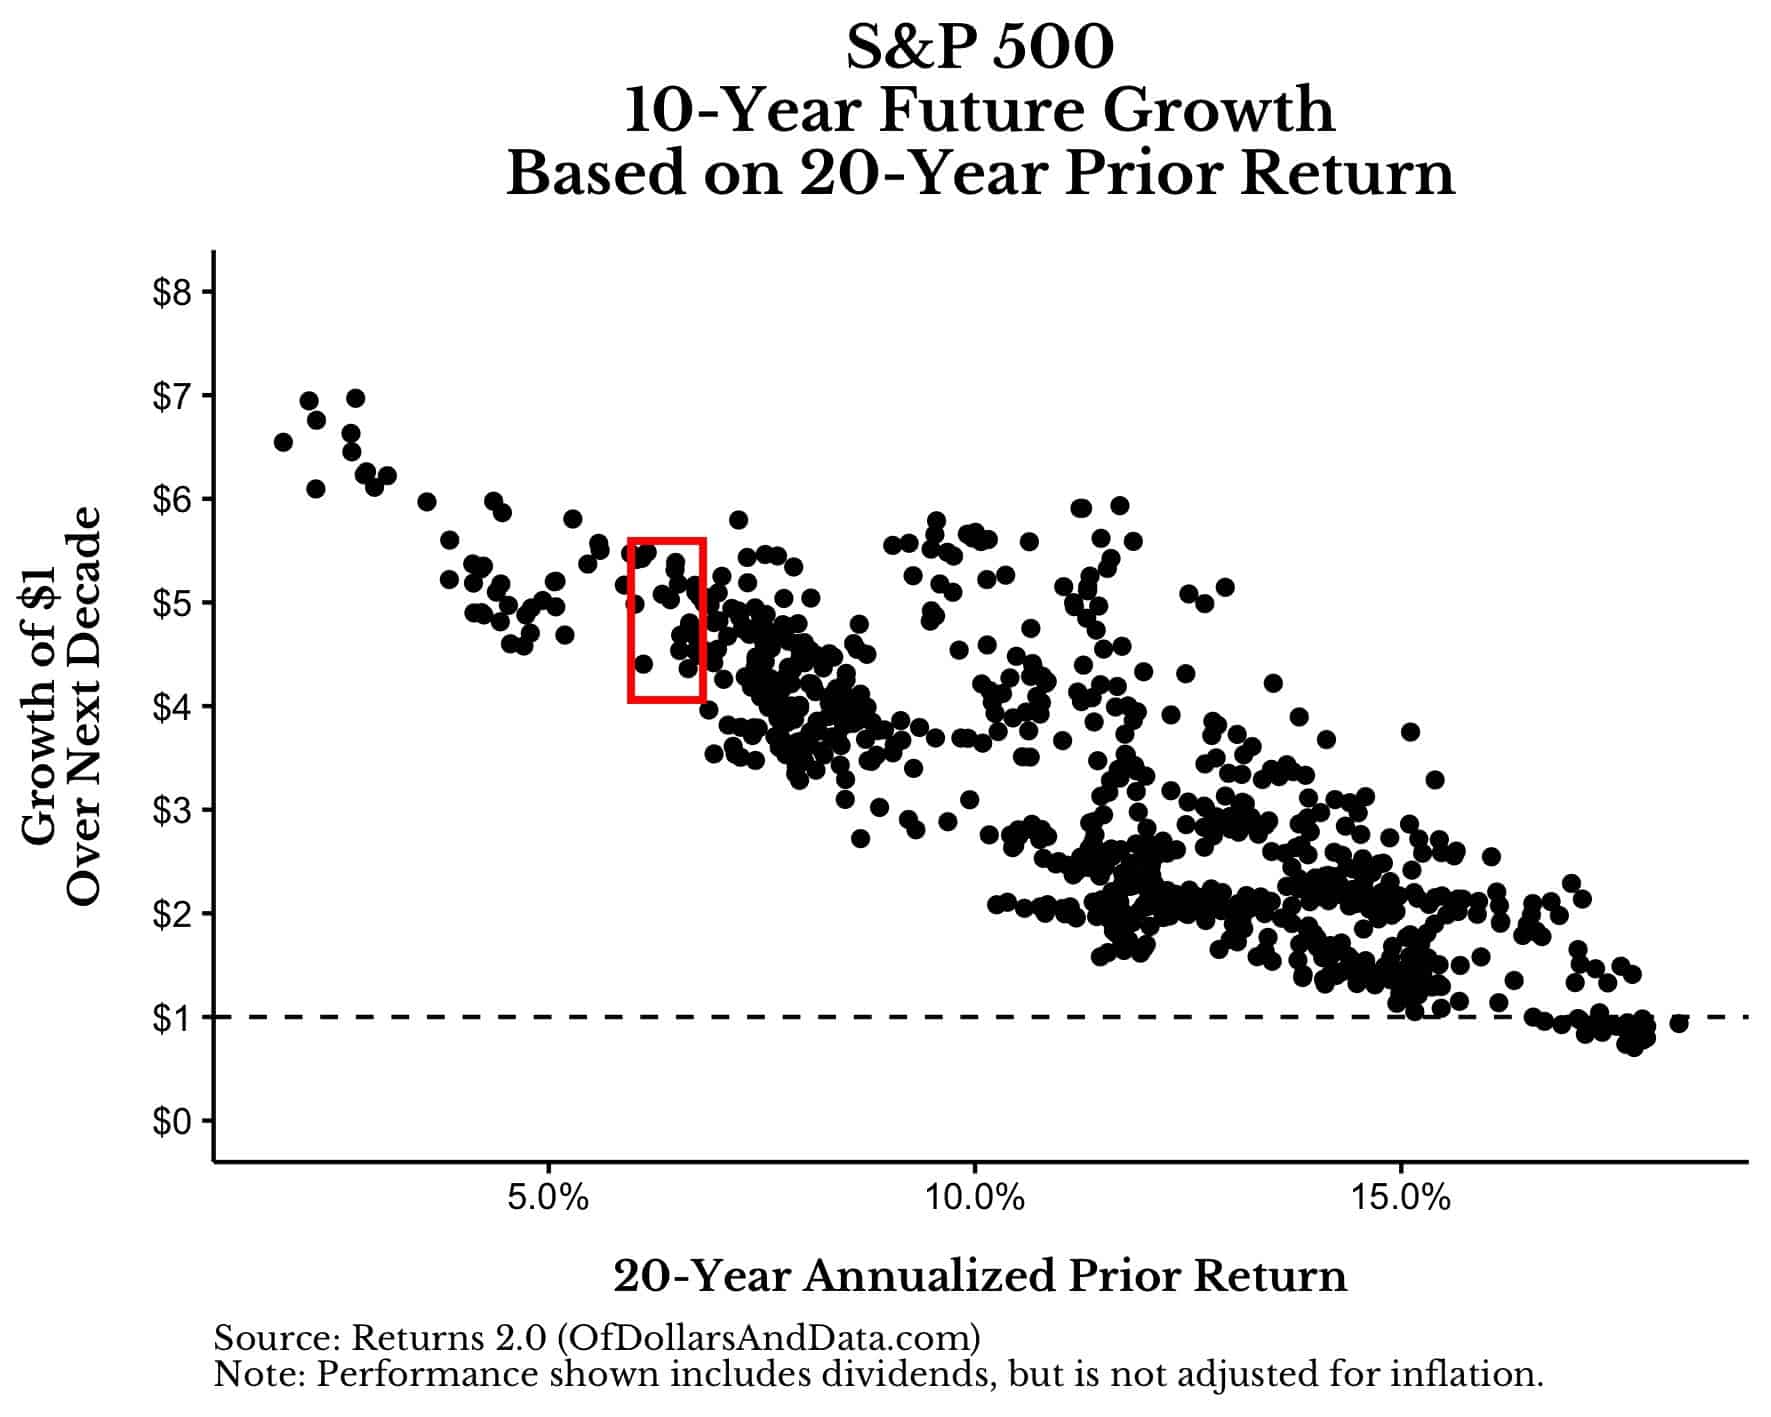 Chart of S&P 500 10-year future growth based on 20-year prior return and where we are now.